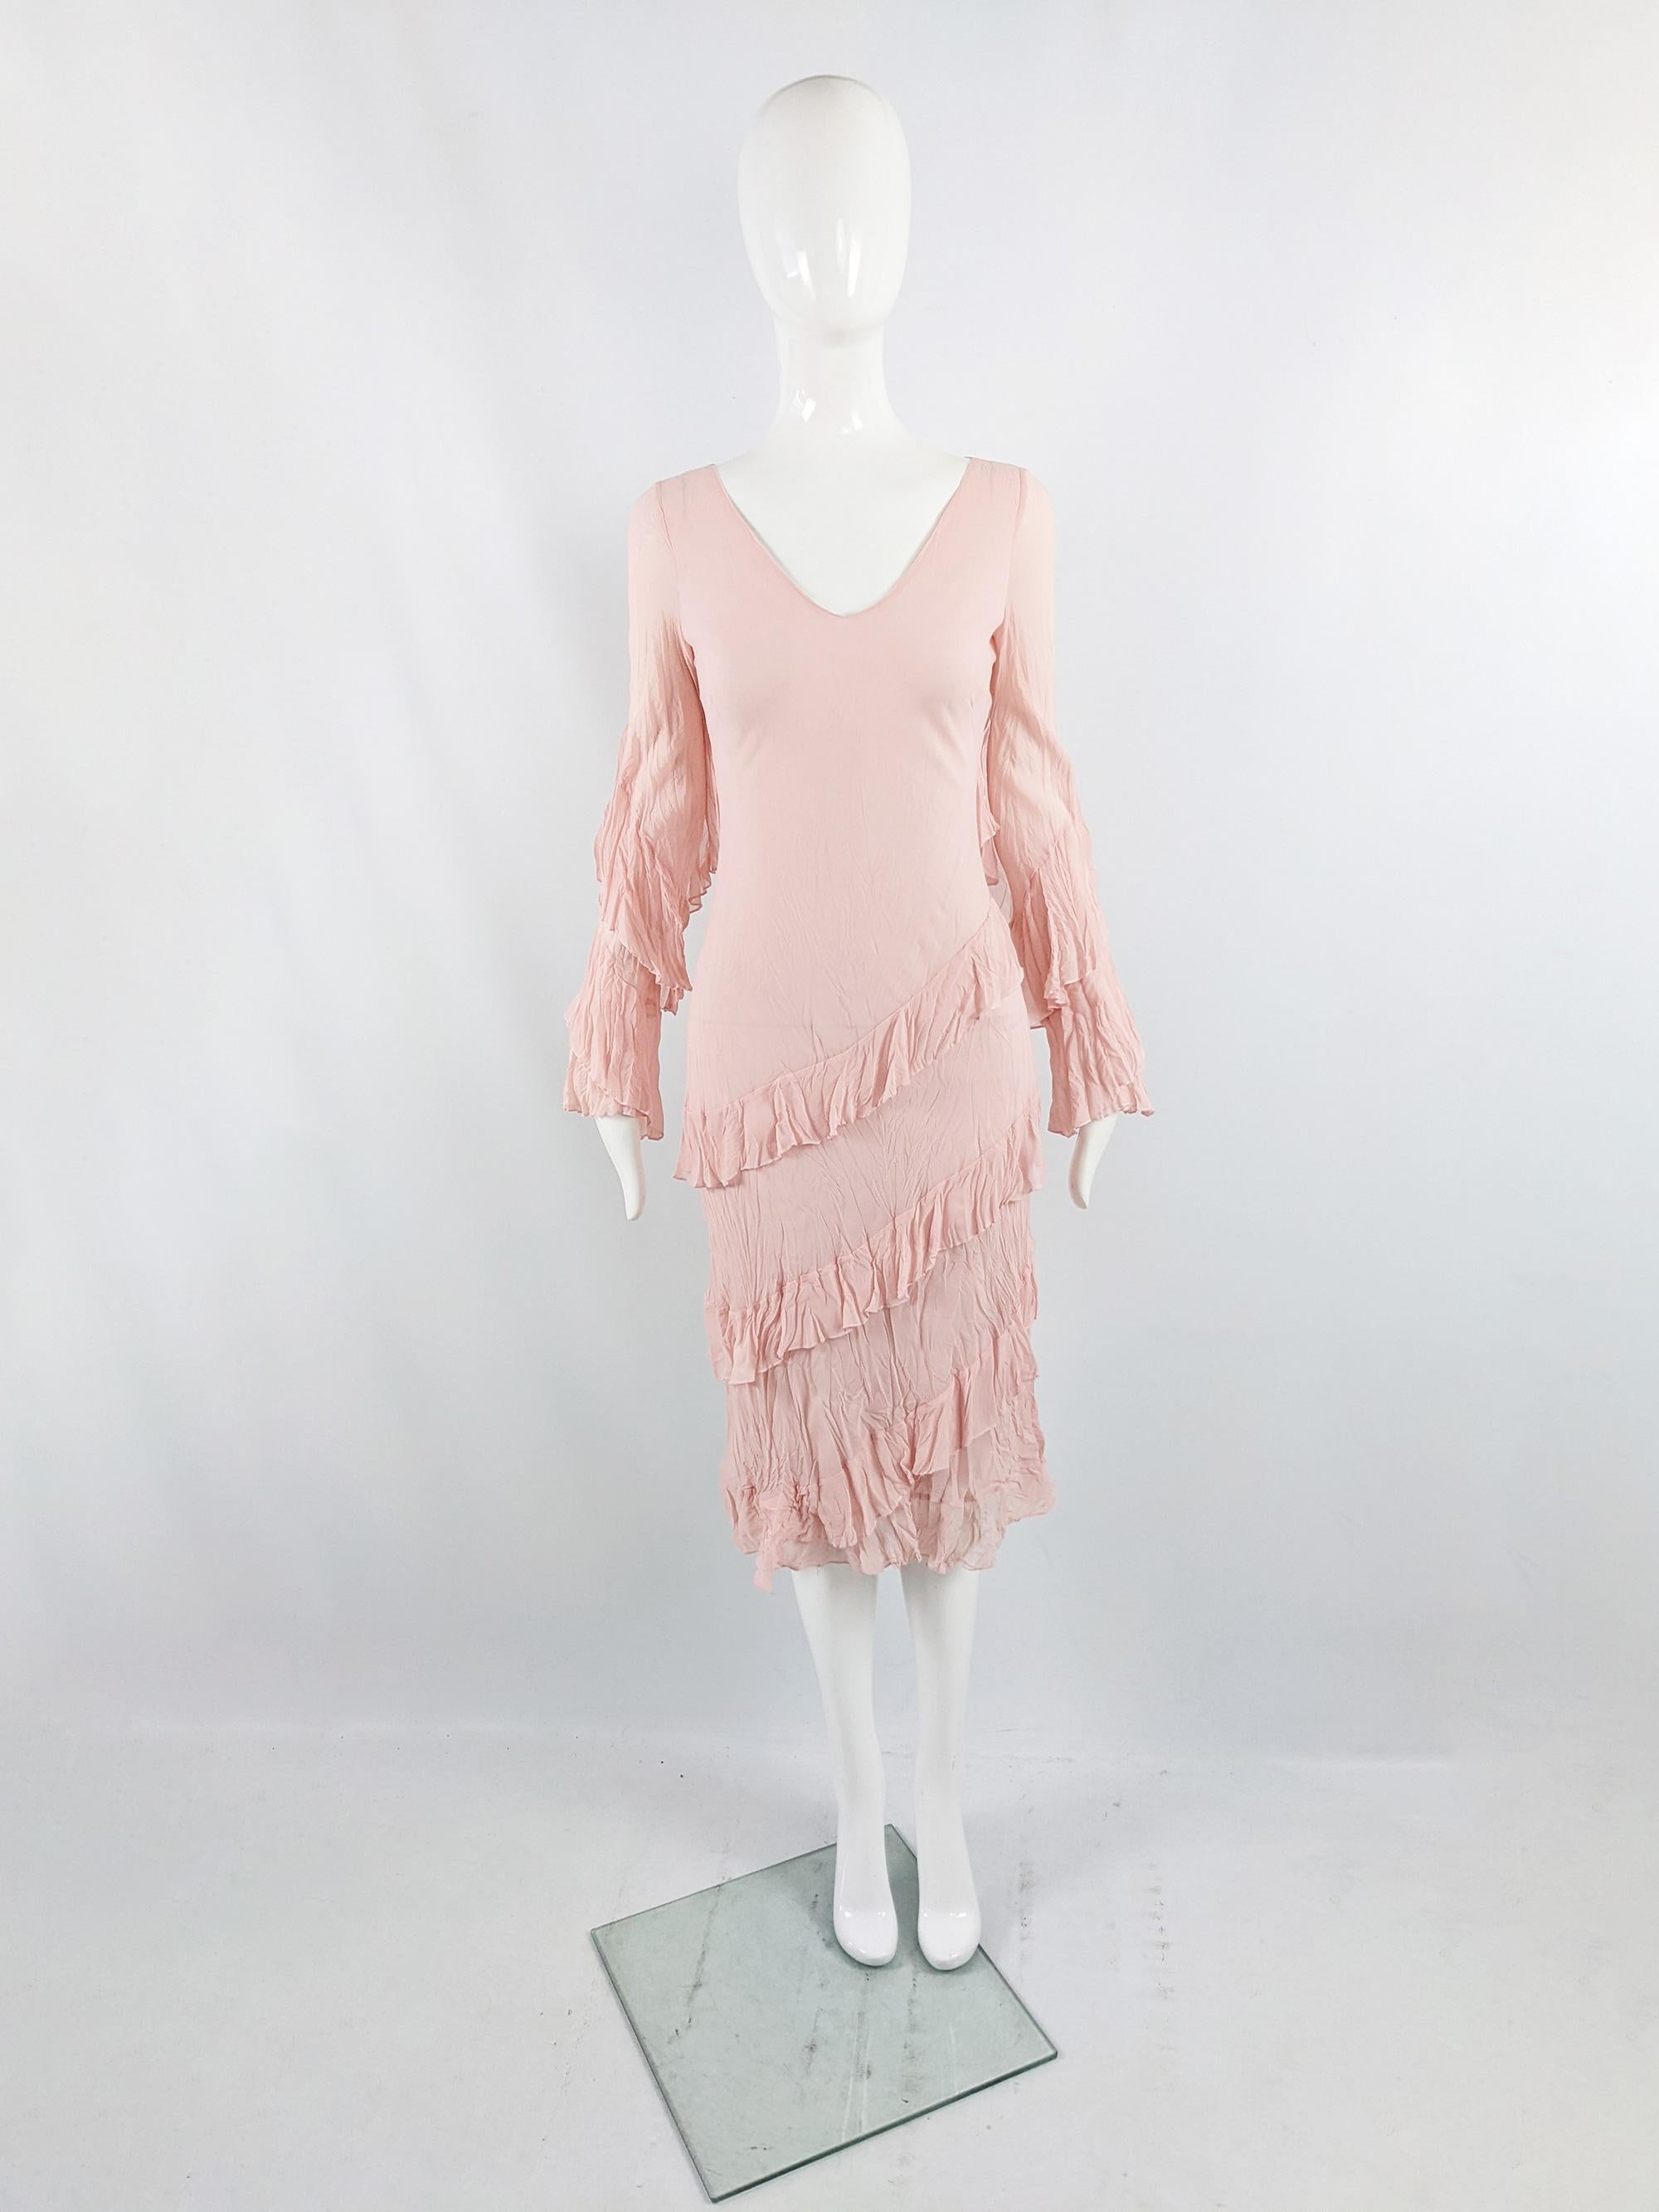 A super cute vintage womens dress from the late 90s / early 2000s by Parisian designer label, Angel Nina. In a pastel pink crinkled fabric with ruffled tiers on the sleeves and hem. Perfect for the day or dressed up at a party in the evening.

Size: